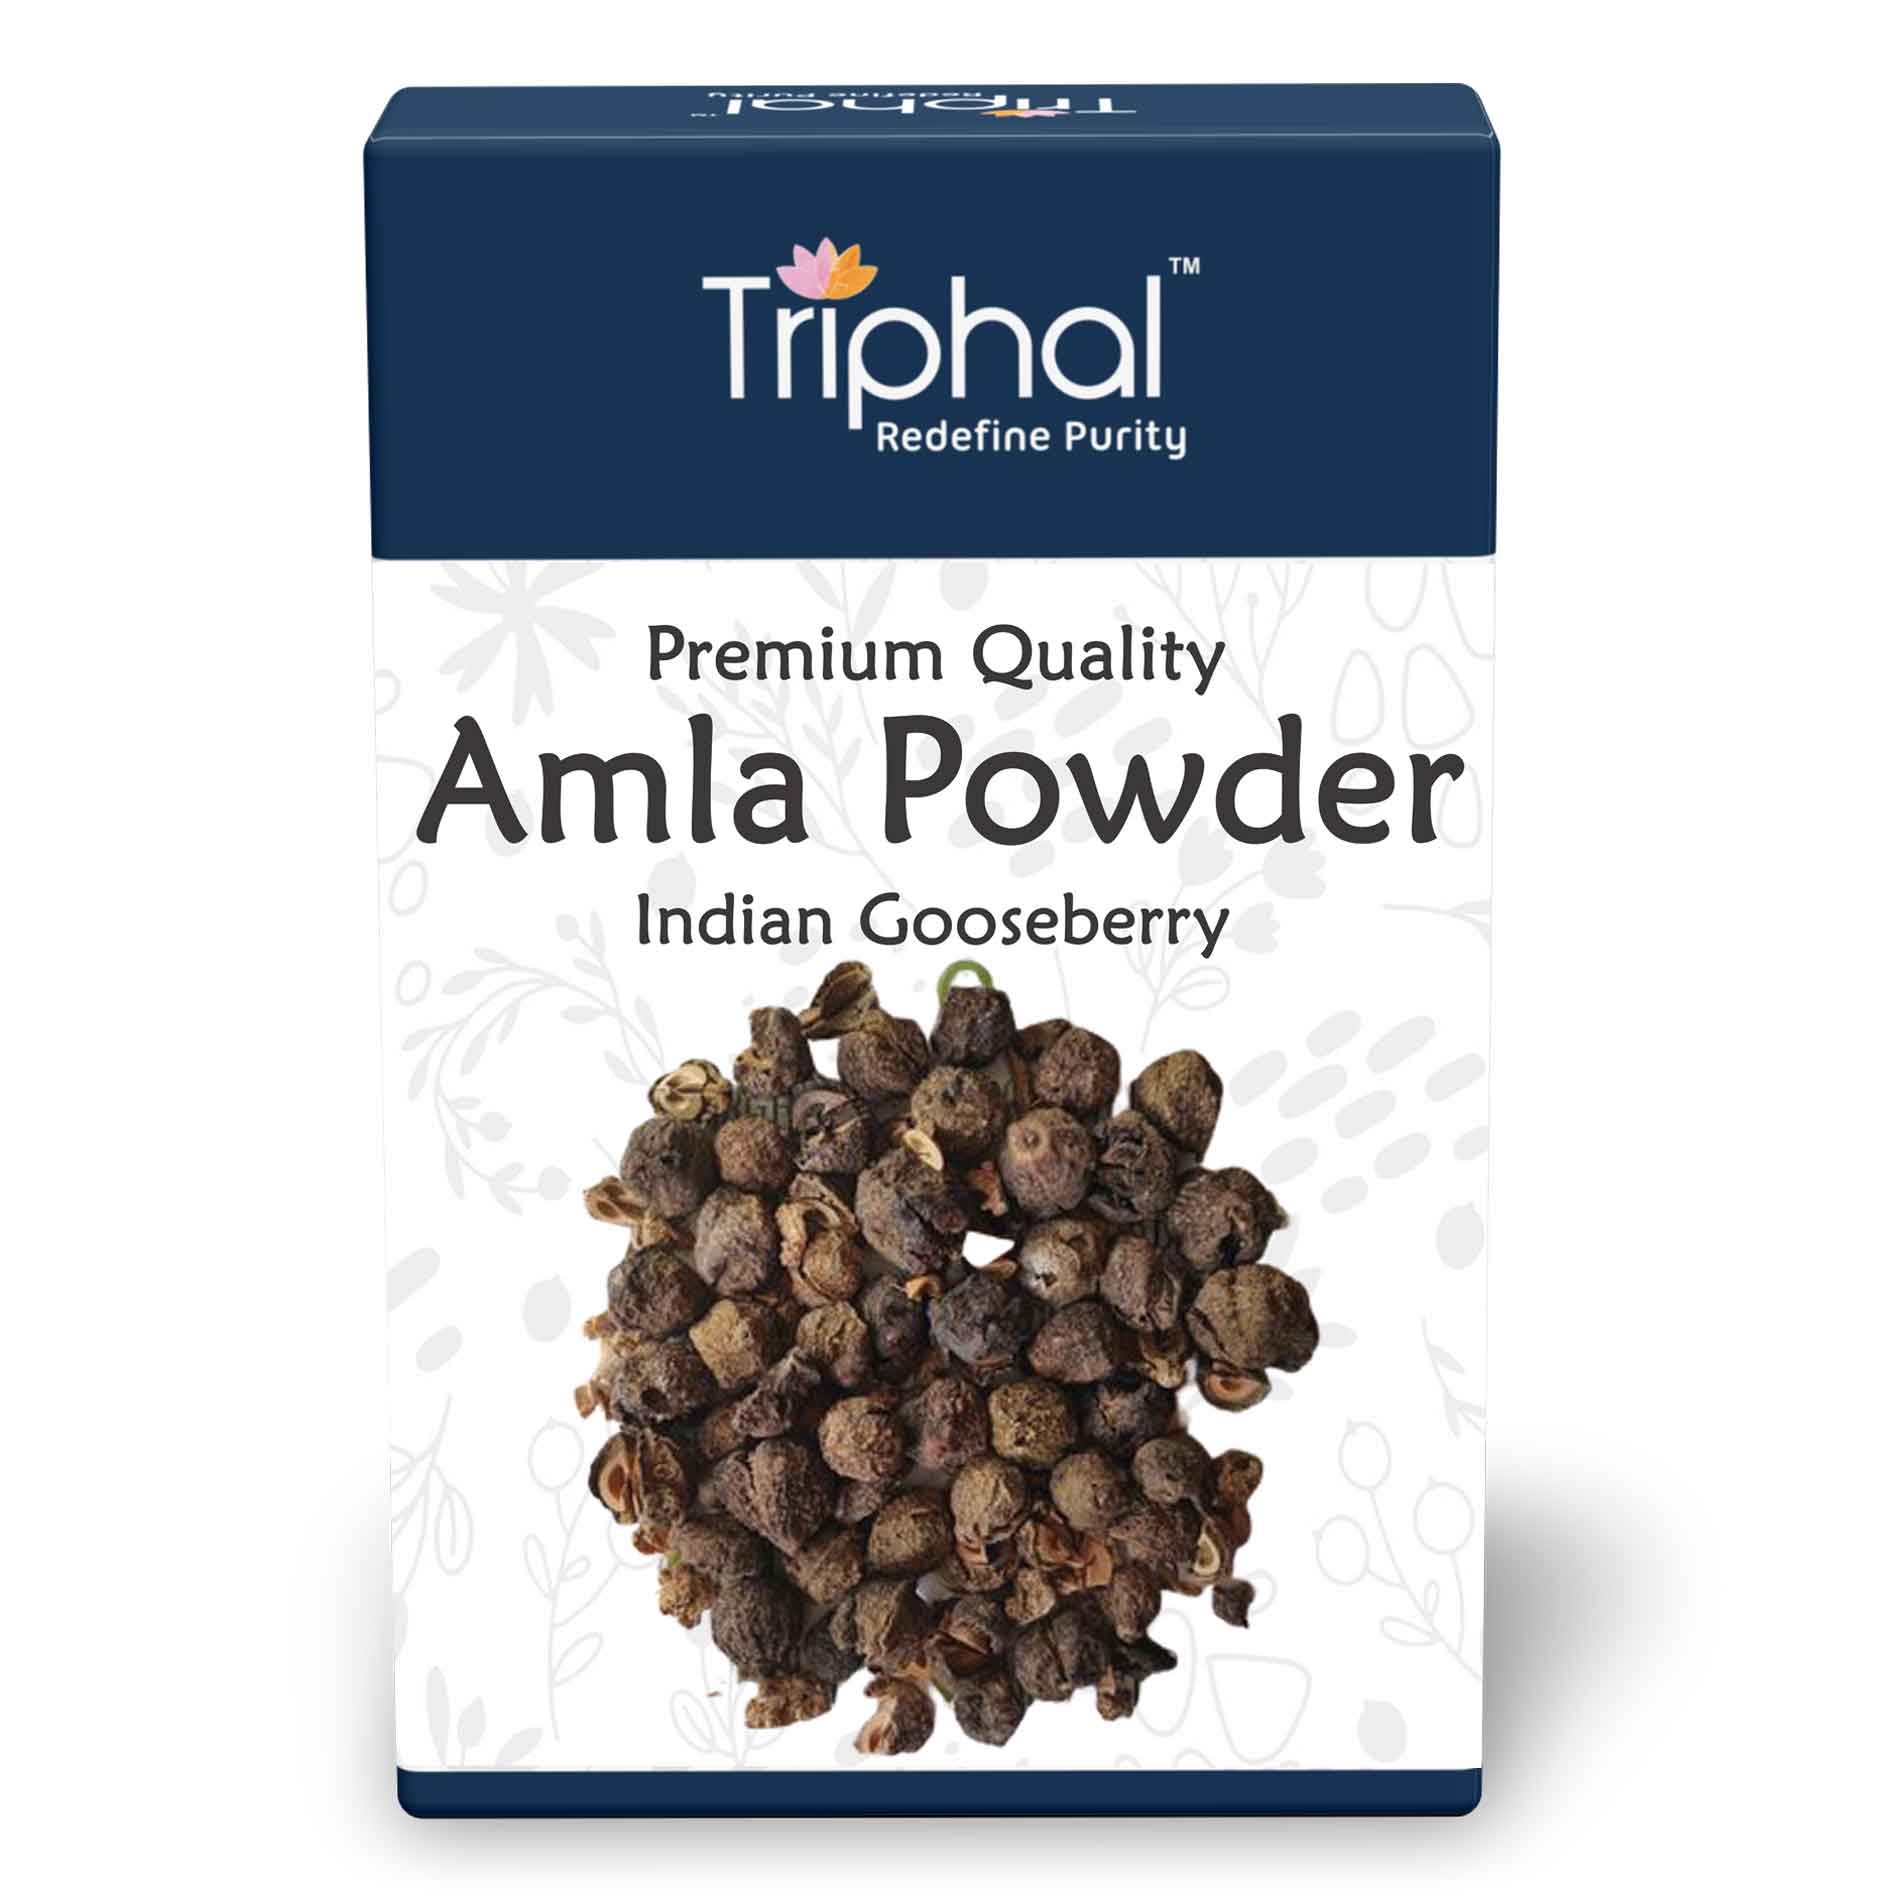 Amla Powder (for eating) - Good for hair, skin, digestion and many more